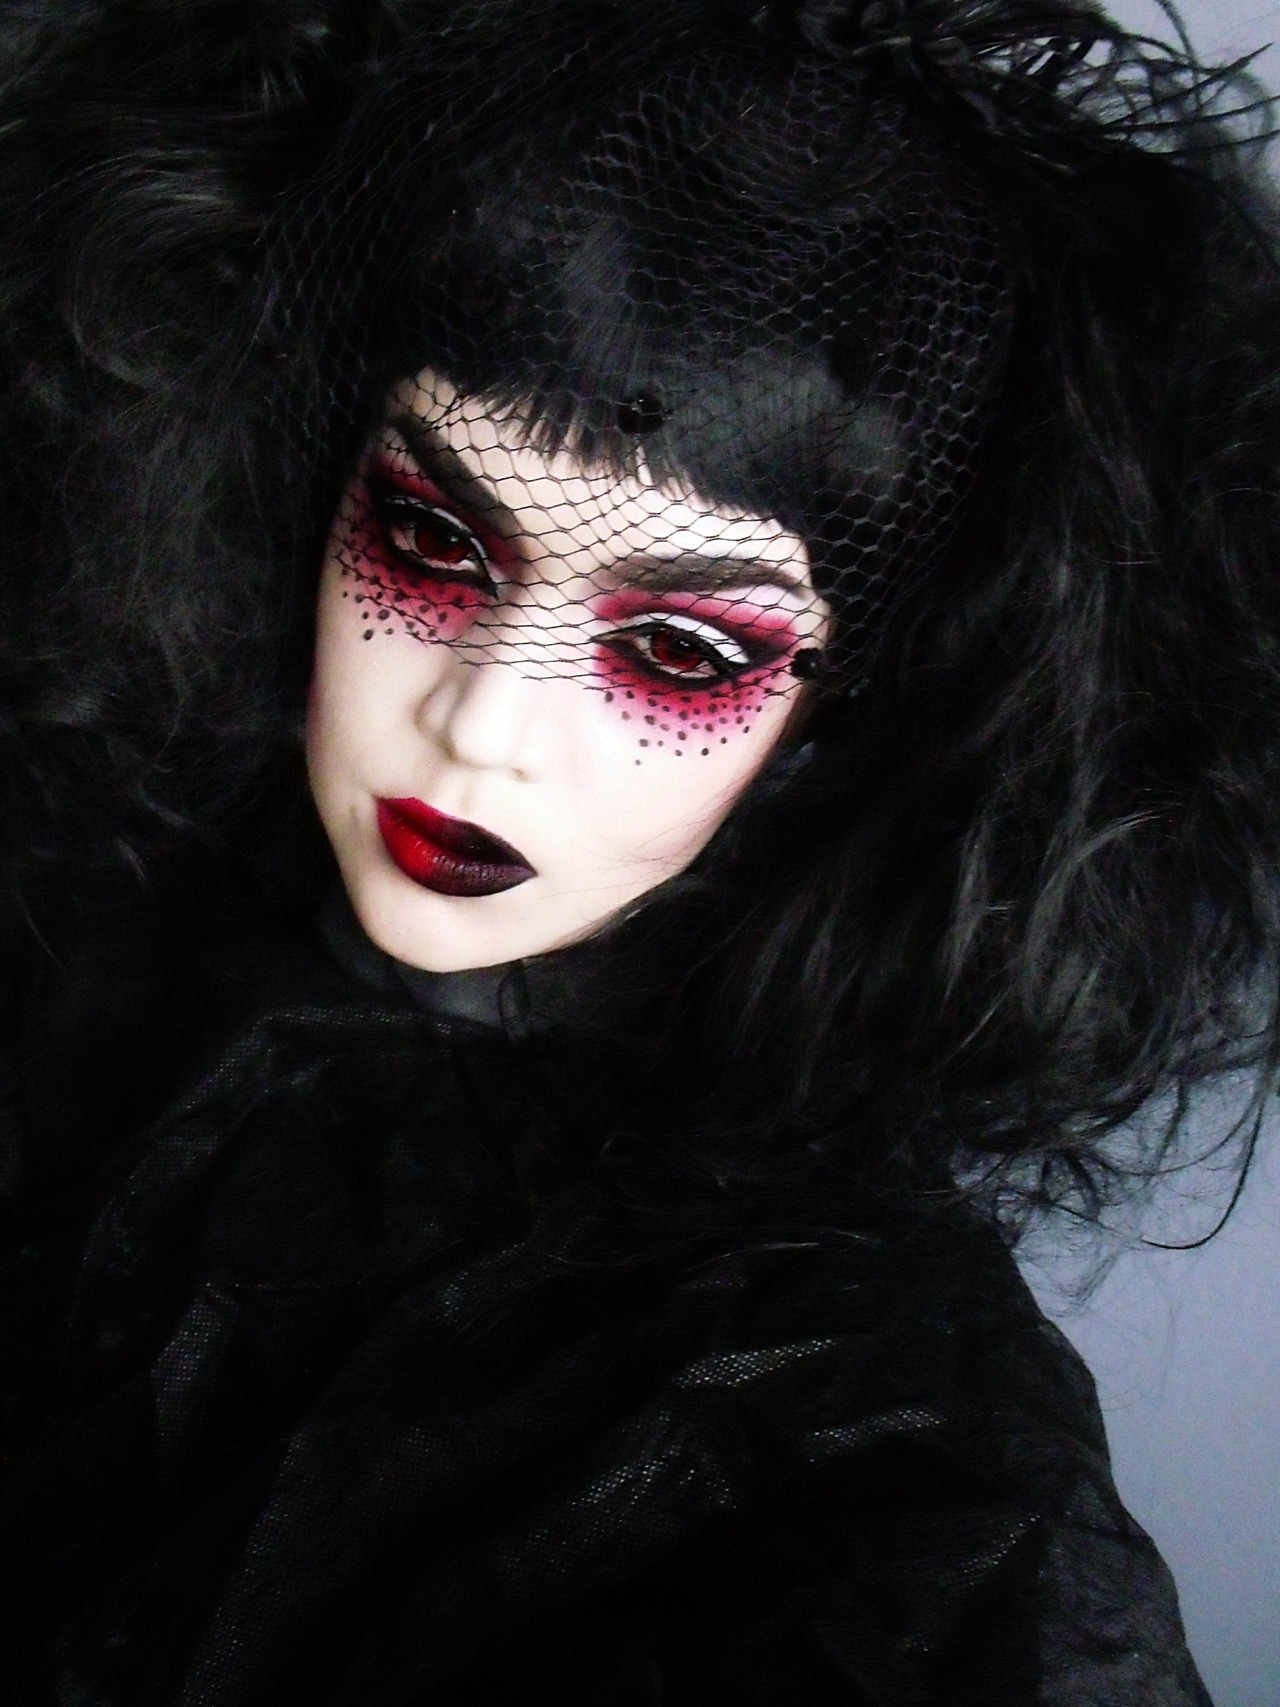 noble-of-shadows: 12.23.15 I have not felt the... - Gothic and Amazing